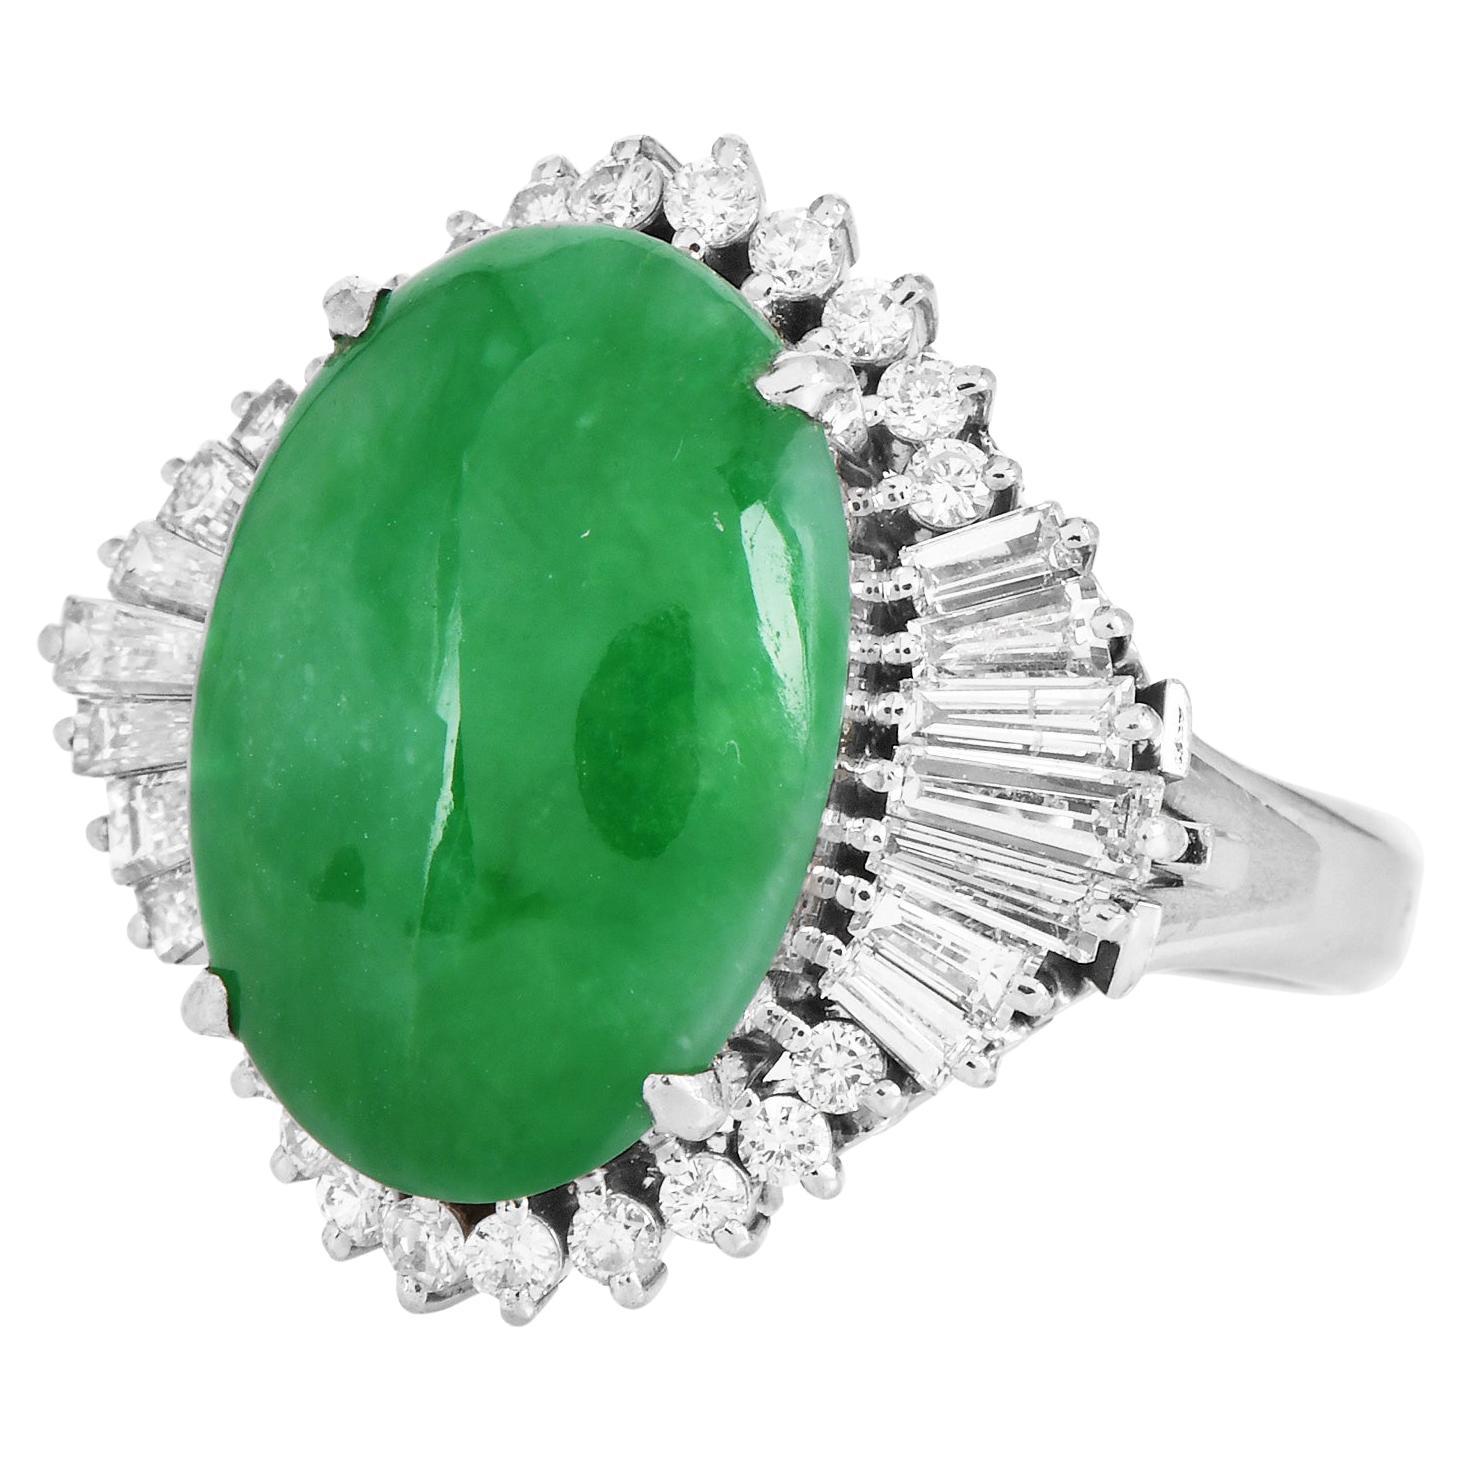 A halo of diamonds surrounds by A Natural Apple Green Jade. 

This jade cocktail ring is  crafted in solid Platinum,  featuring in the center a Cabochon Oval Cut GIA Green Jade of approx. 9.58 carats, natural color without any treatments.

The